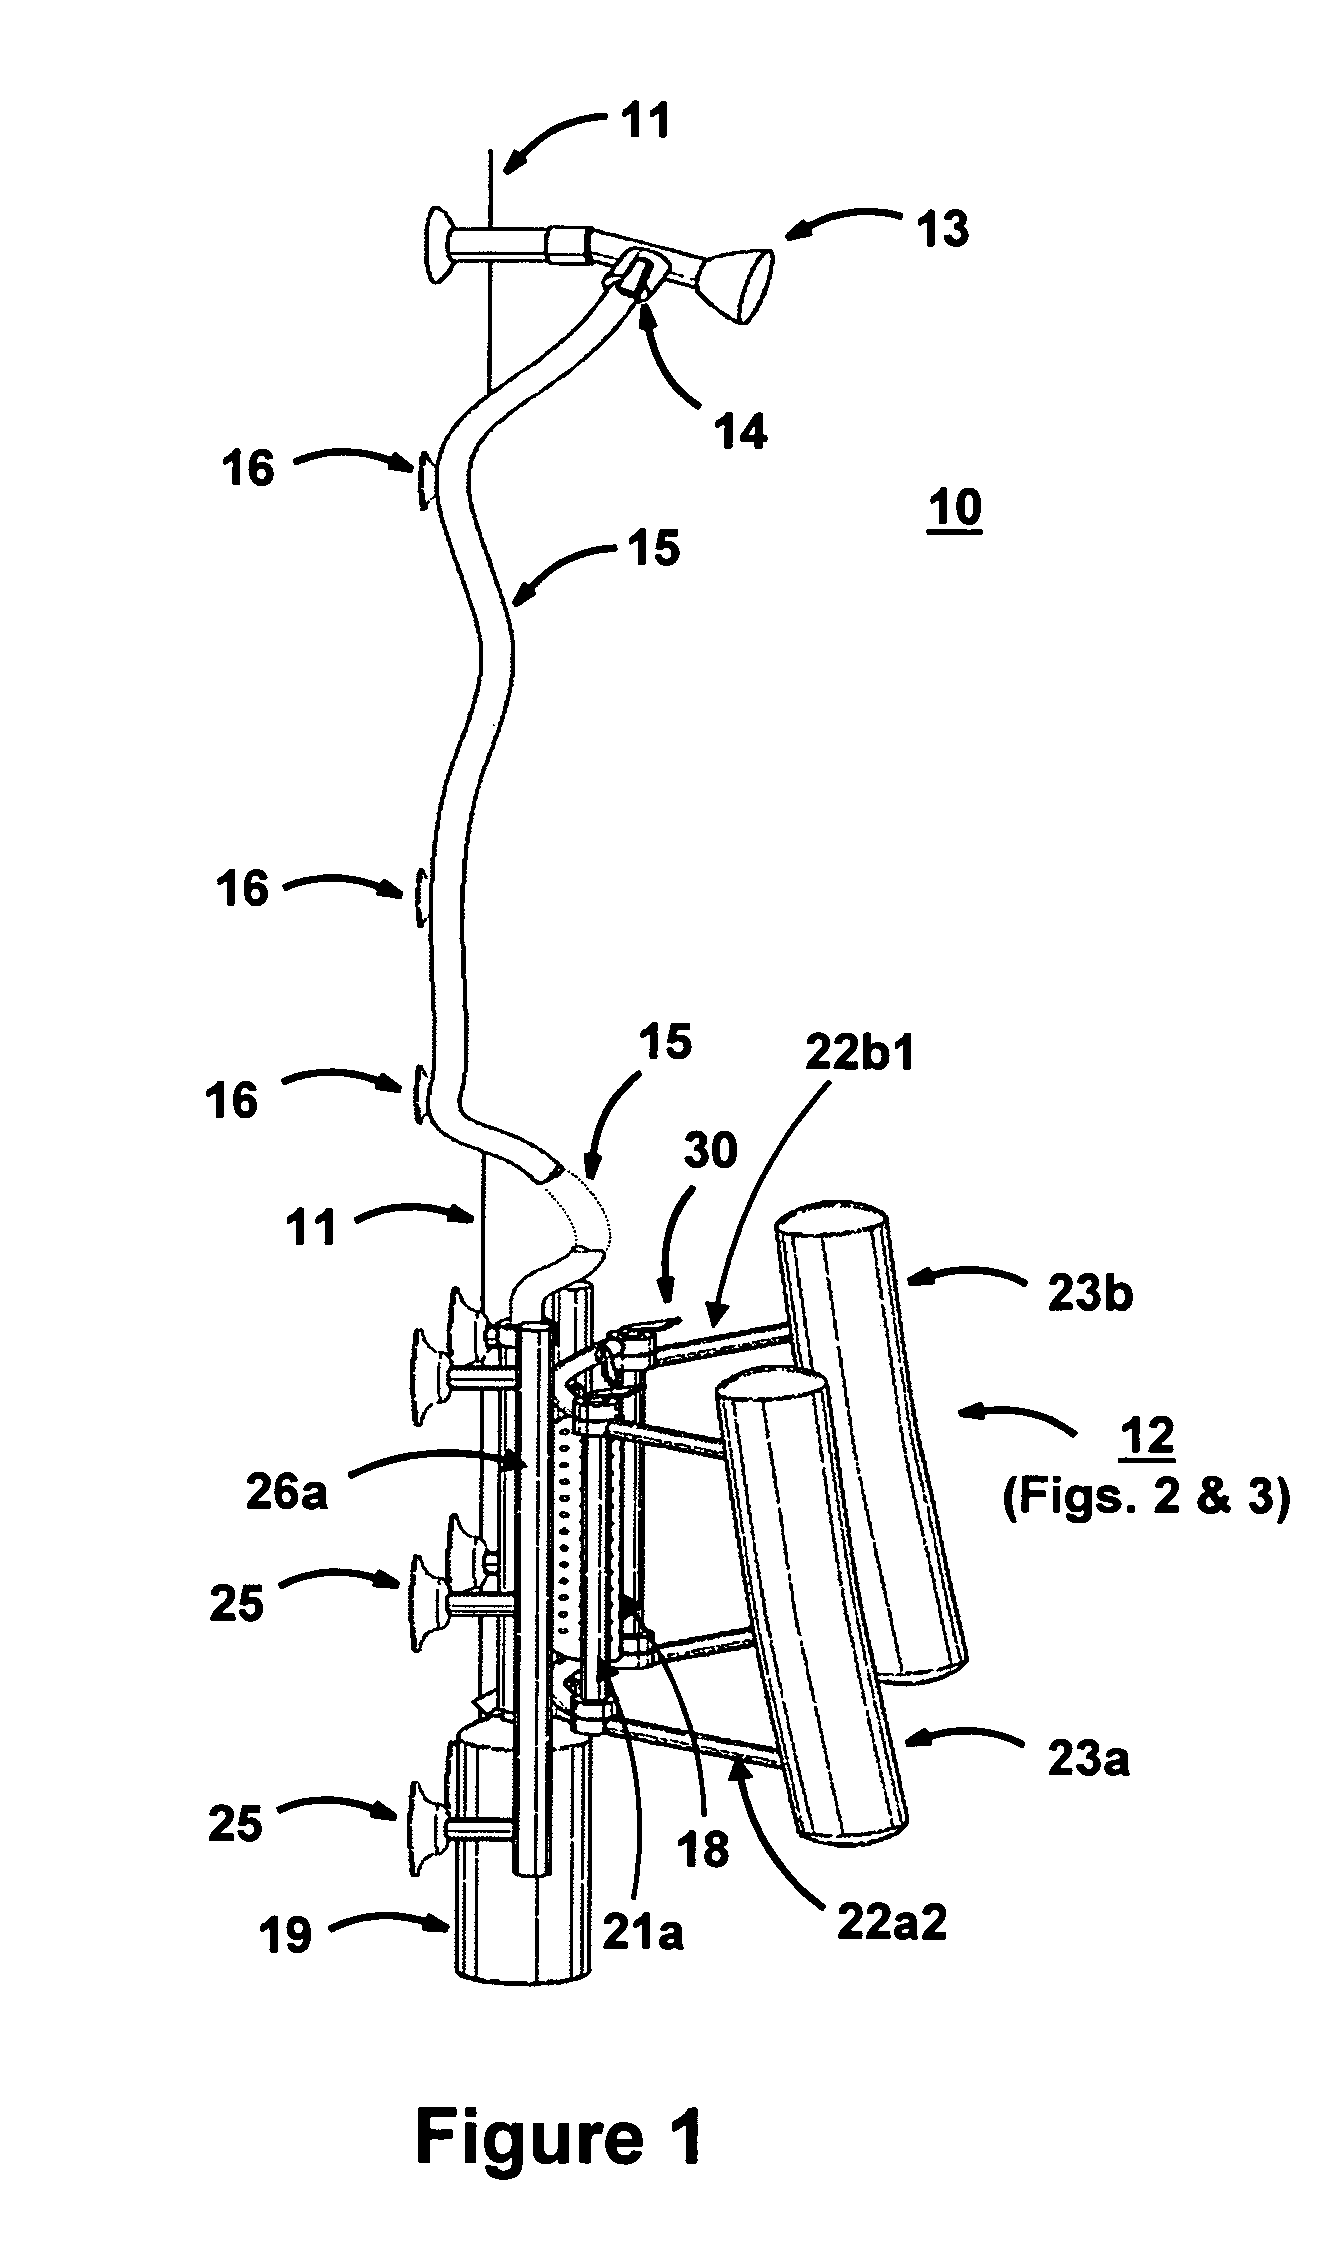 Personal hygiene cleansing and irrigation device